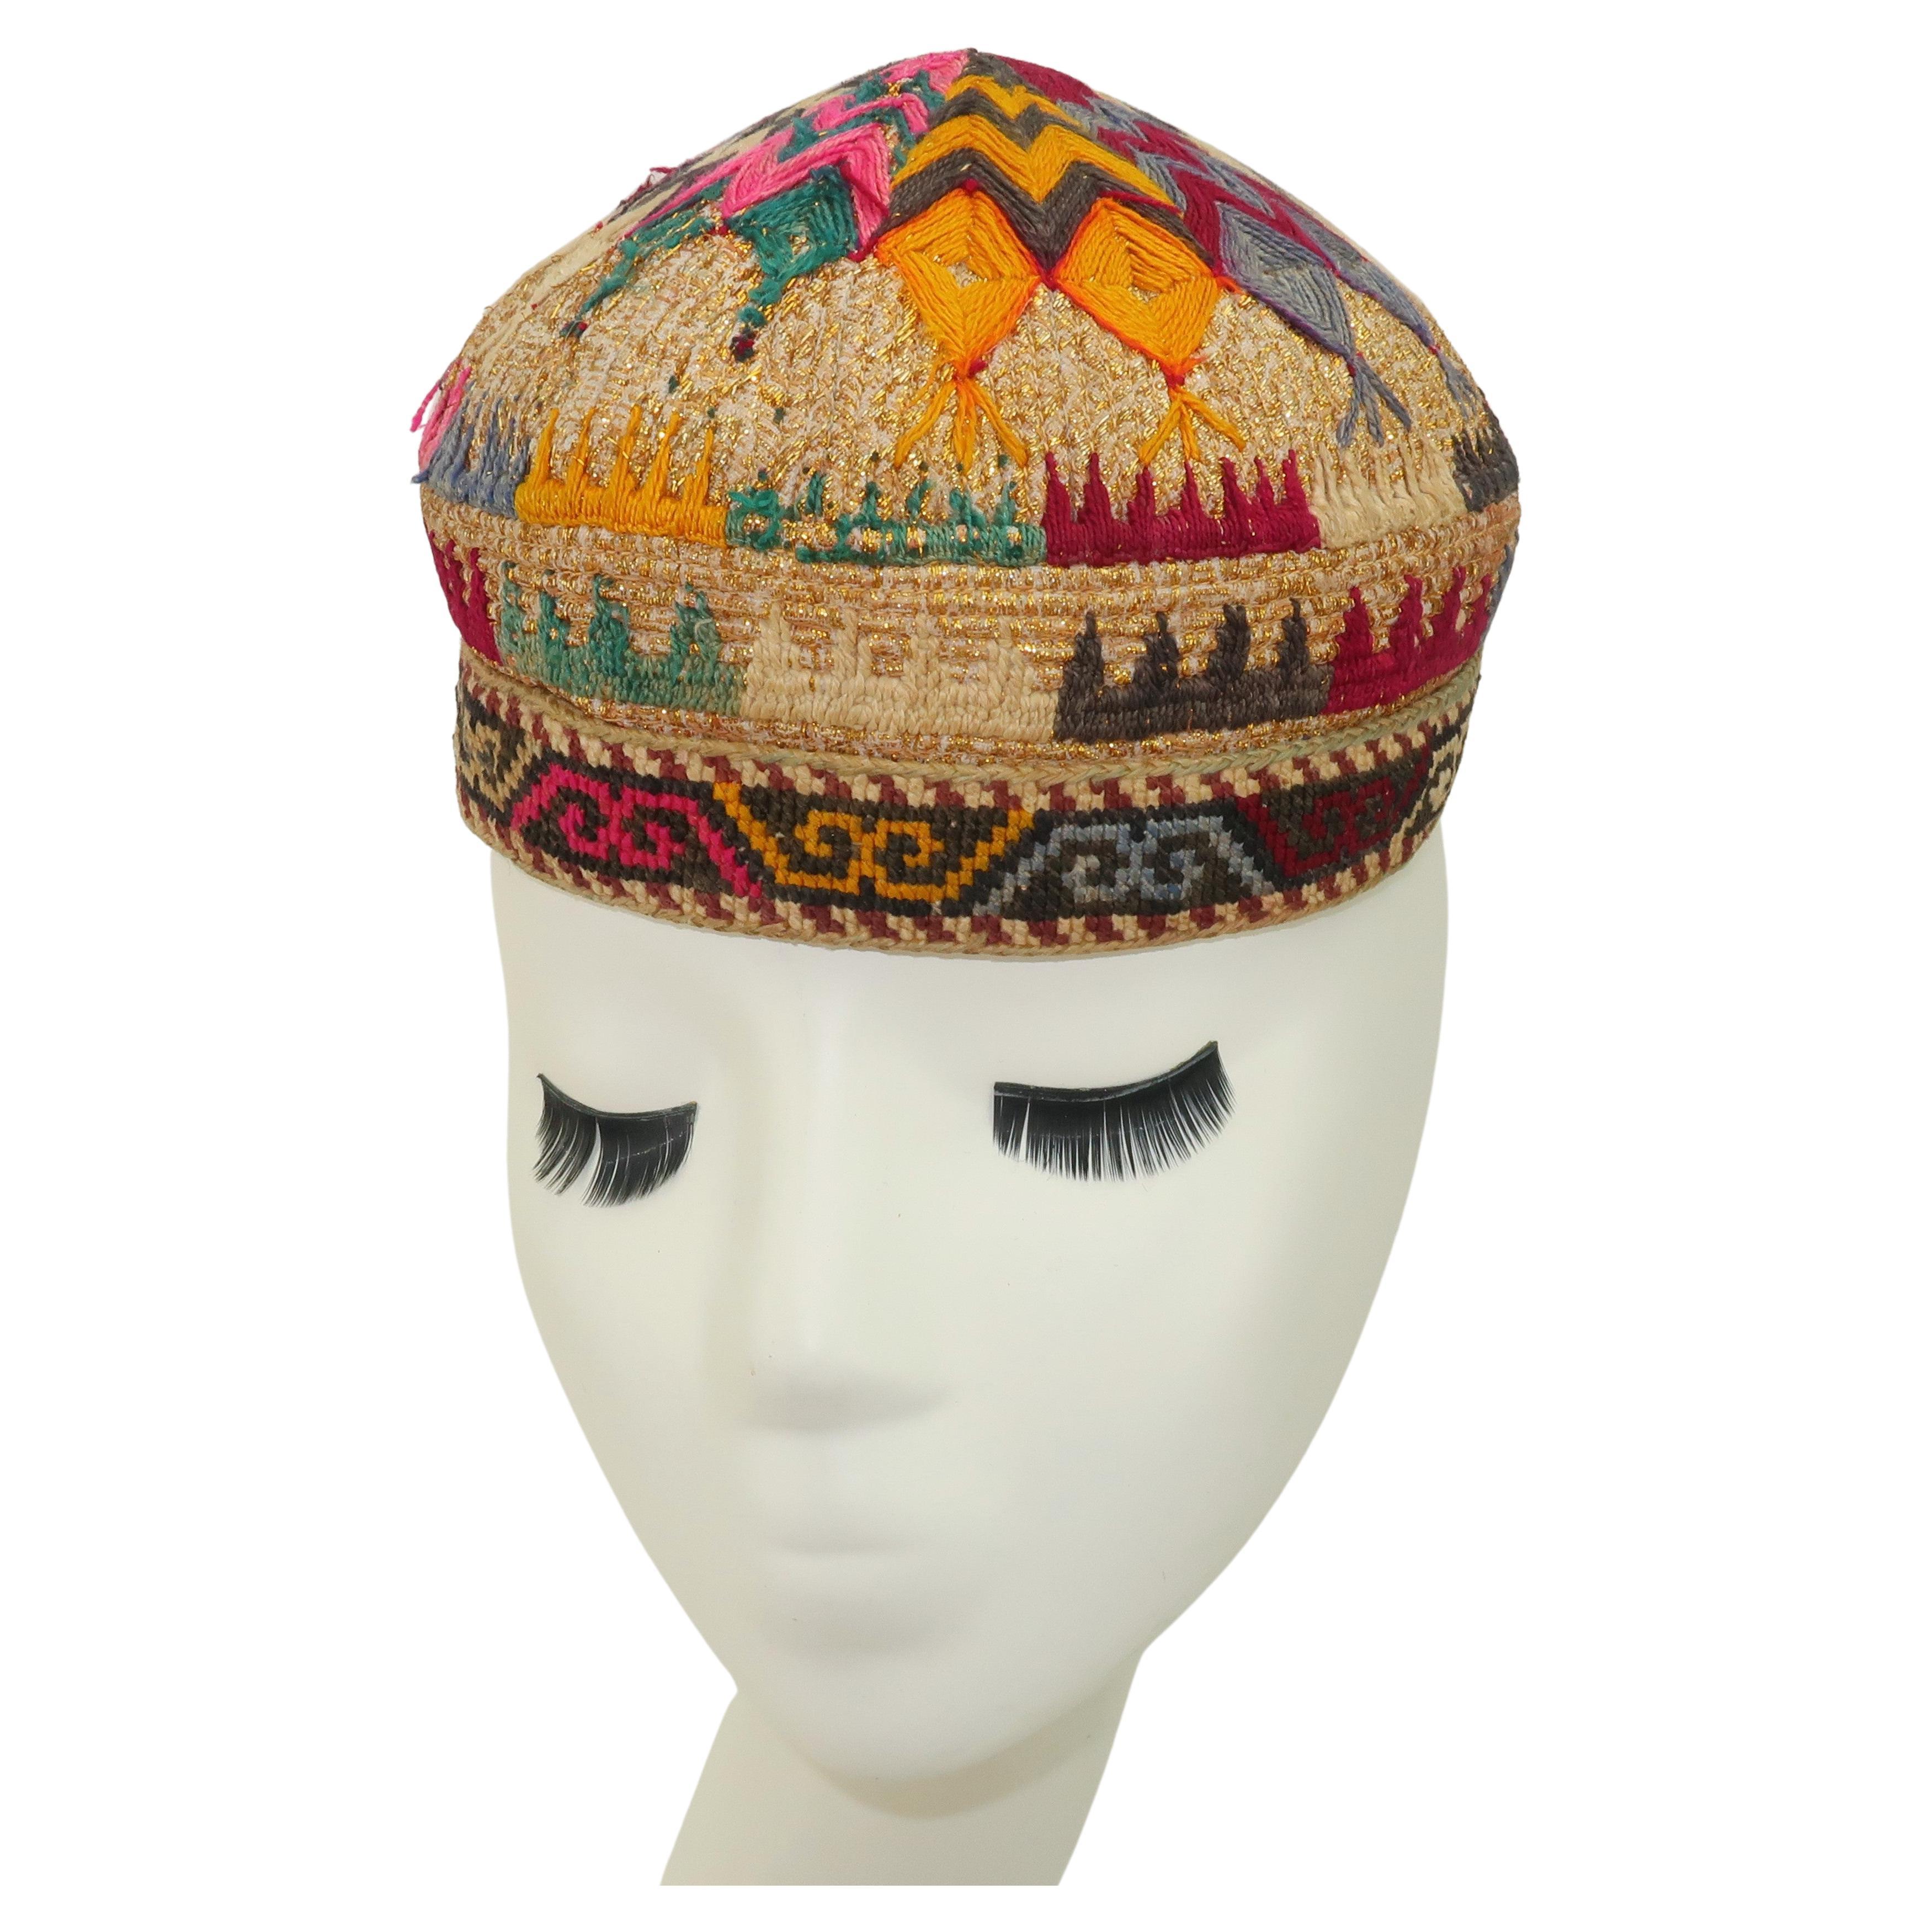 Early 20th Century Colorful Central Asian Embroidered Hat